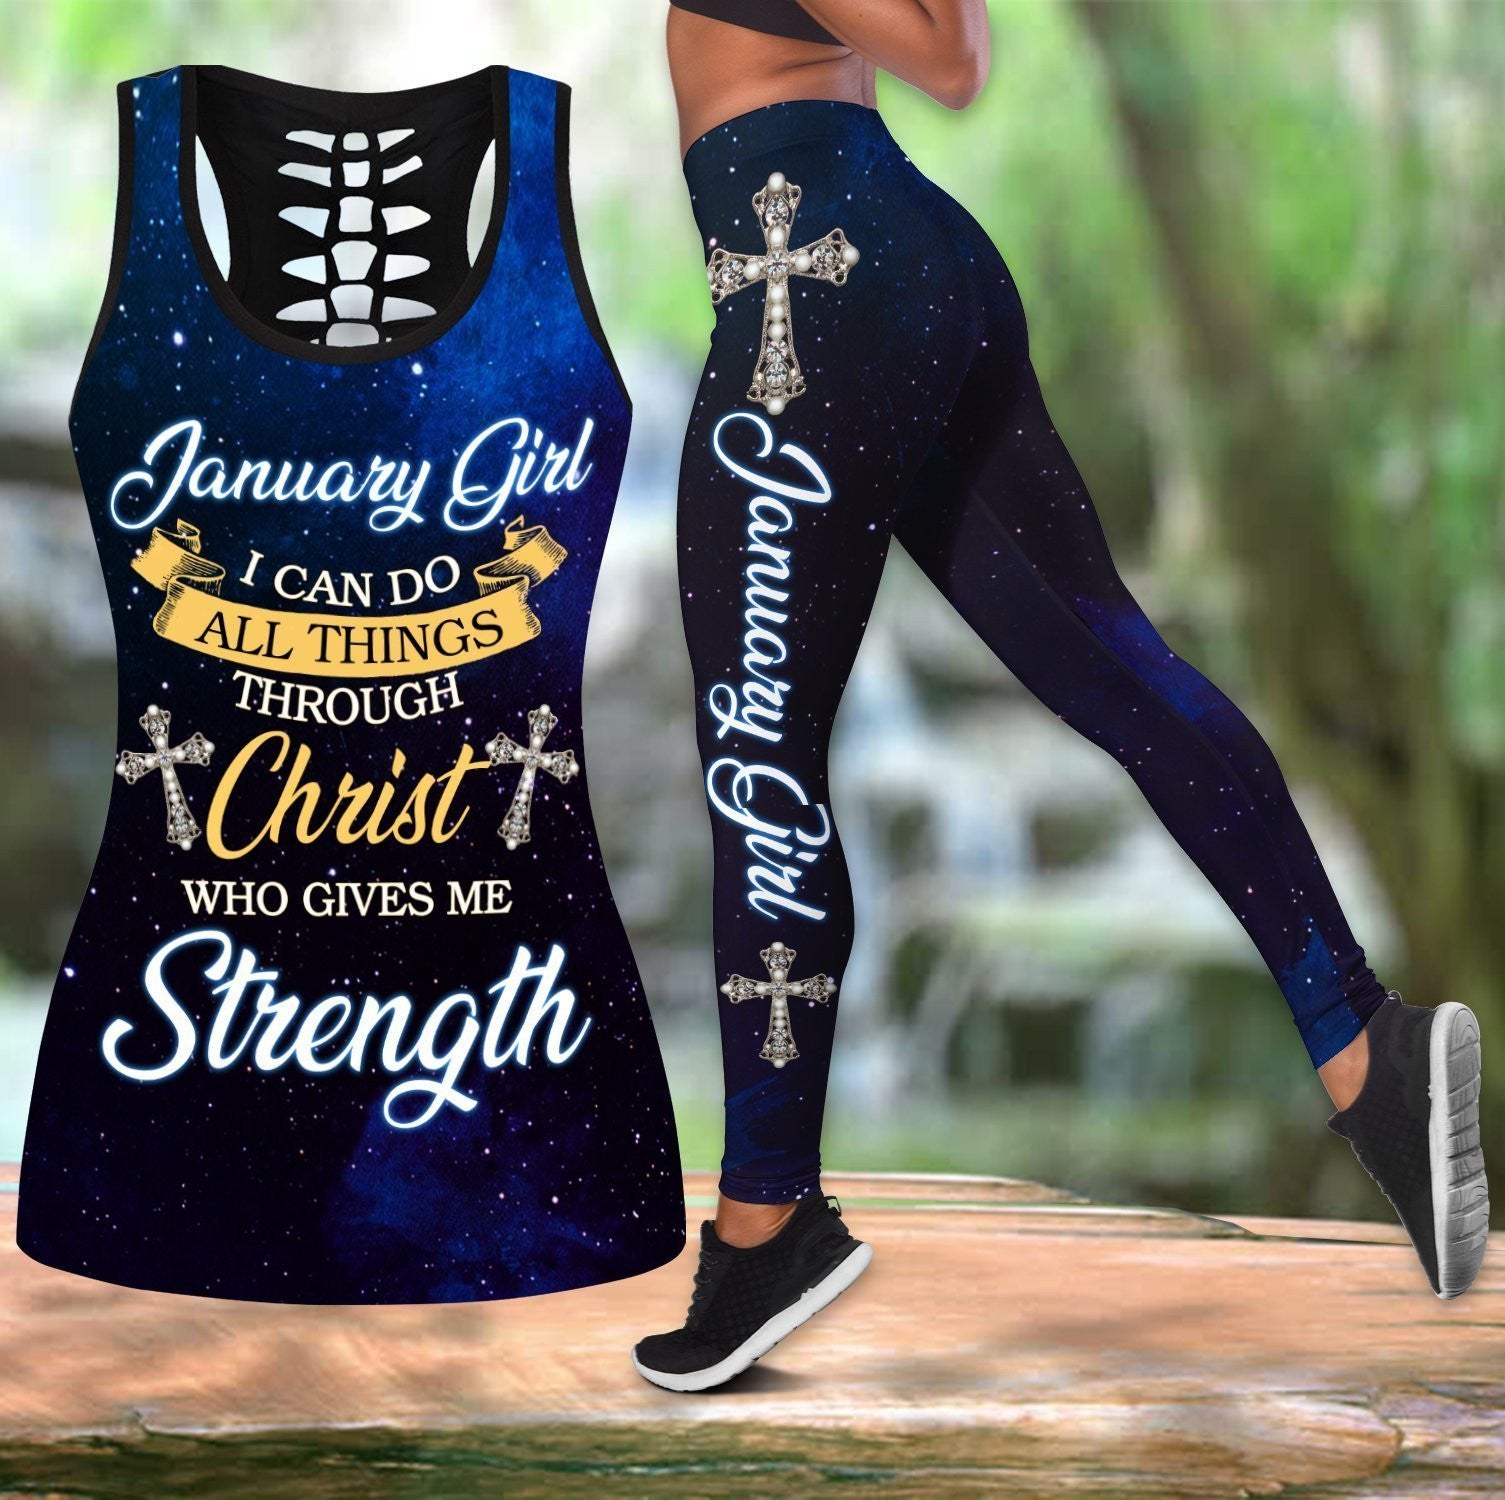 January Girl I Can Do All Things Through Christ Who Give Me Strength Jesus - Christian Tank Top And Legging Sets For Women